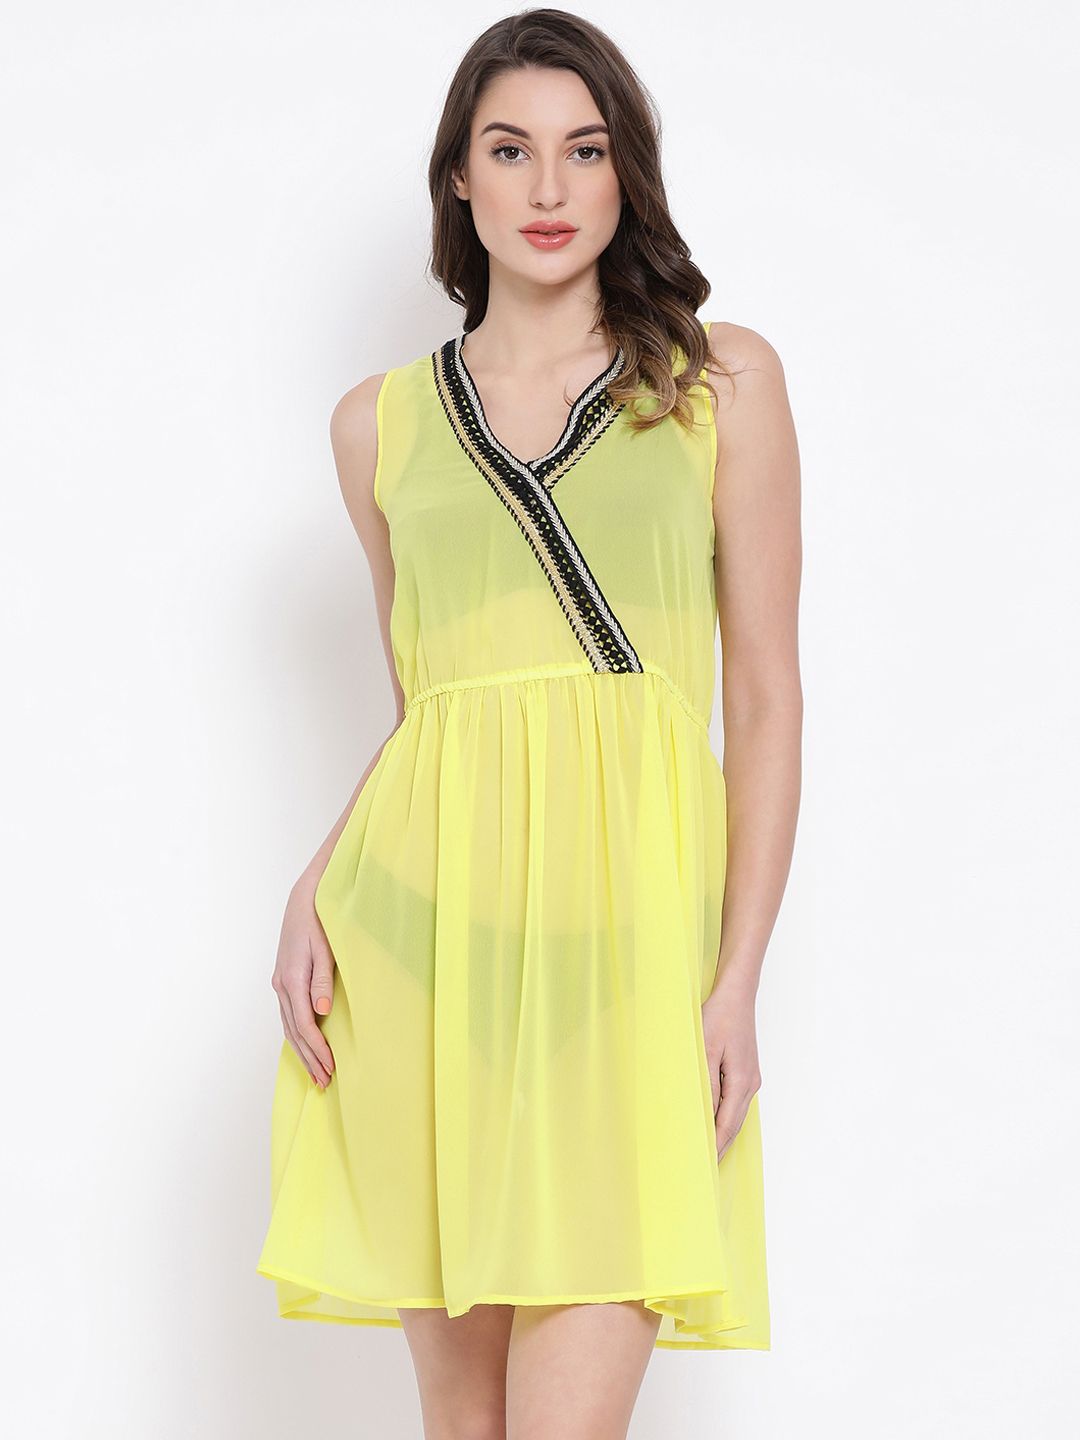 Oxolloxo Women Beachwear Yellow Solid Sheer Cover-Up Dress Price in India